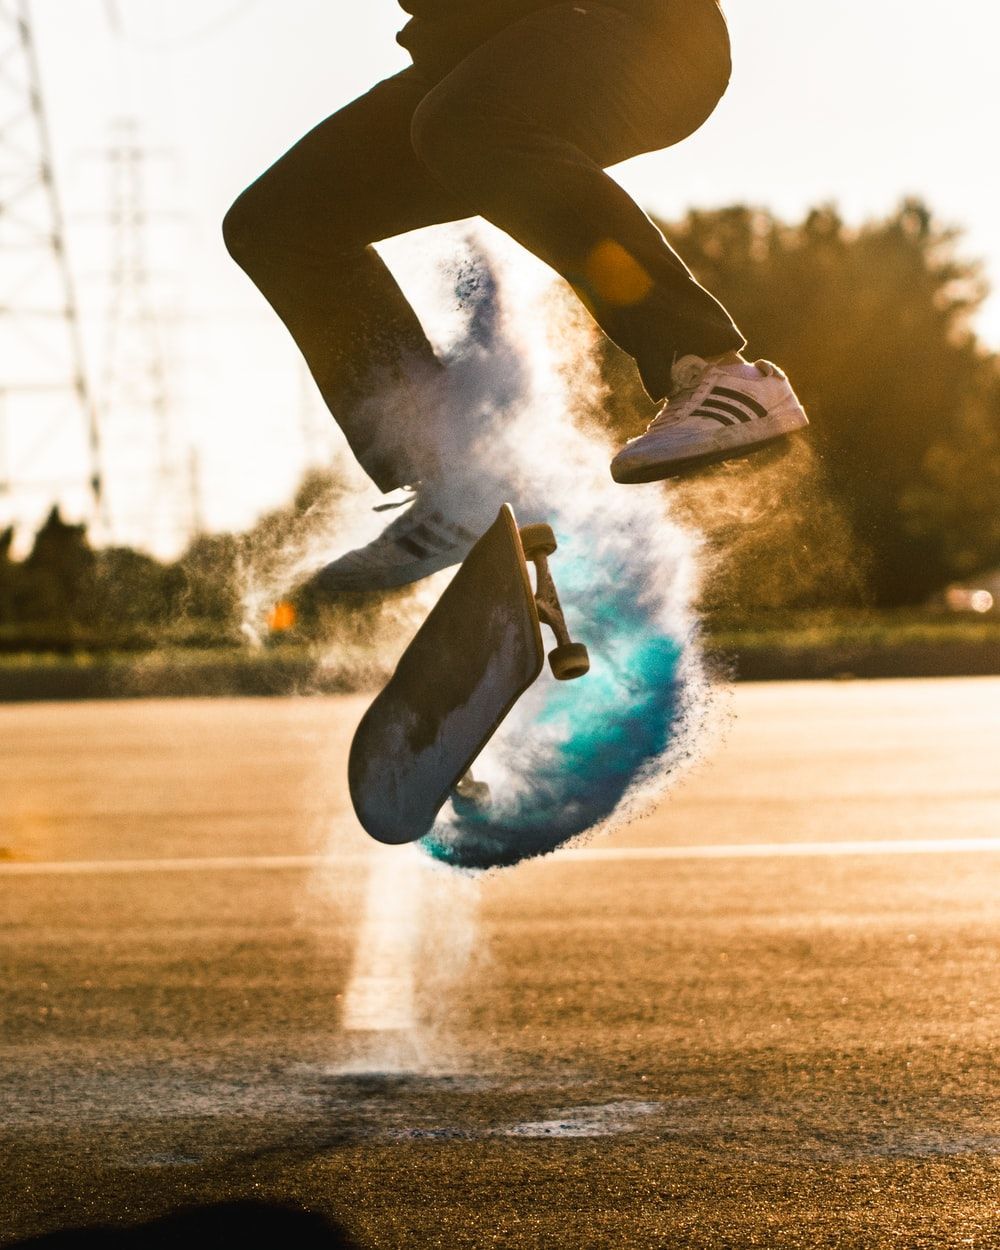 A skateboarder performing a trick in the air - Skate, skater